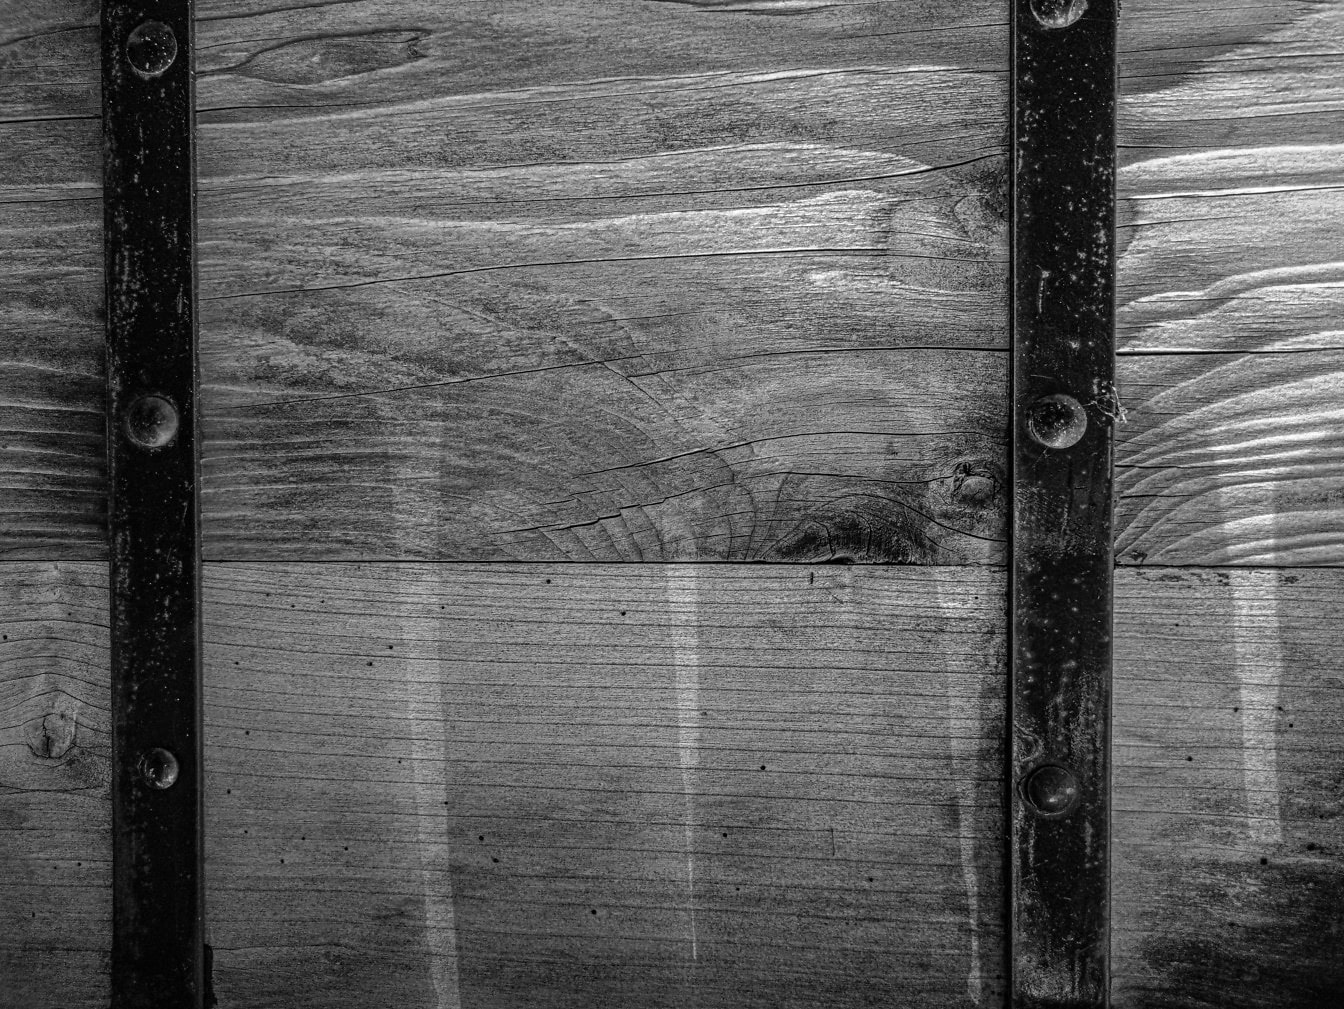 Black and white photo of a black cast iron frame on a wood surface